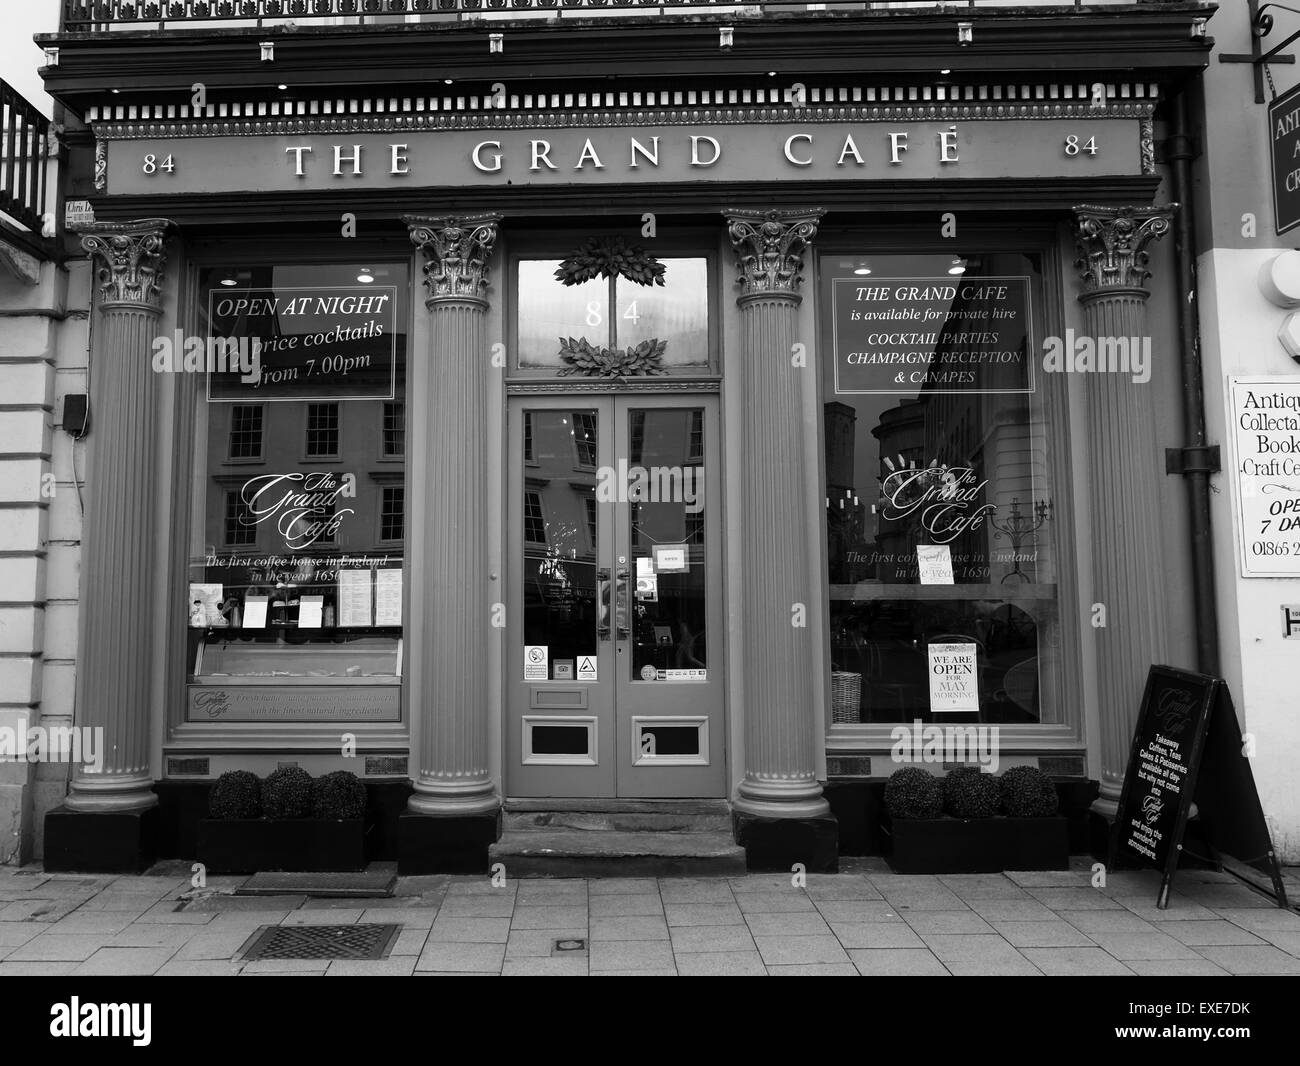 The Grand Café Oxford The Oldest Coffee House in England Stock Photo